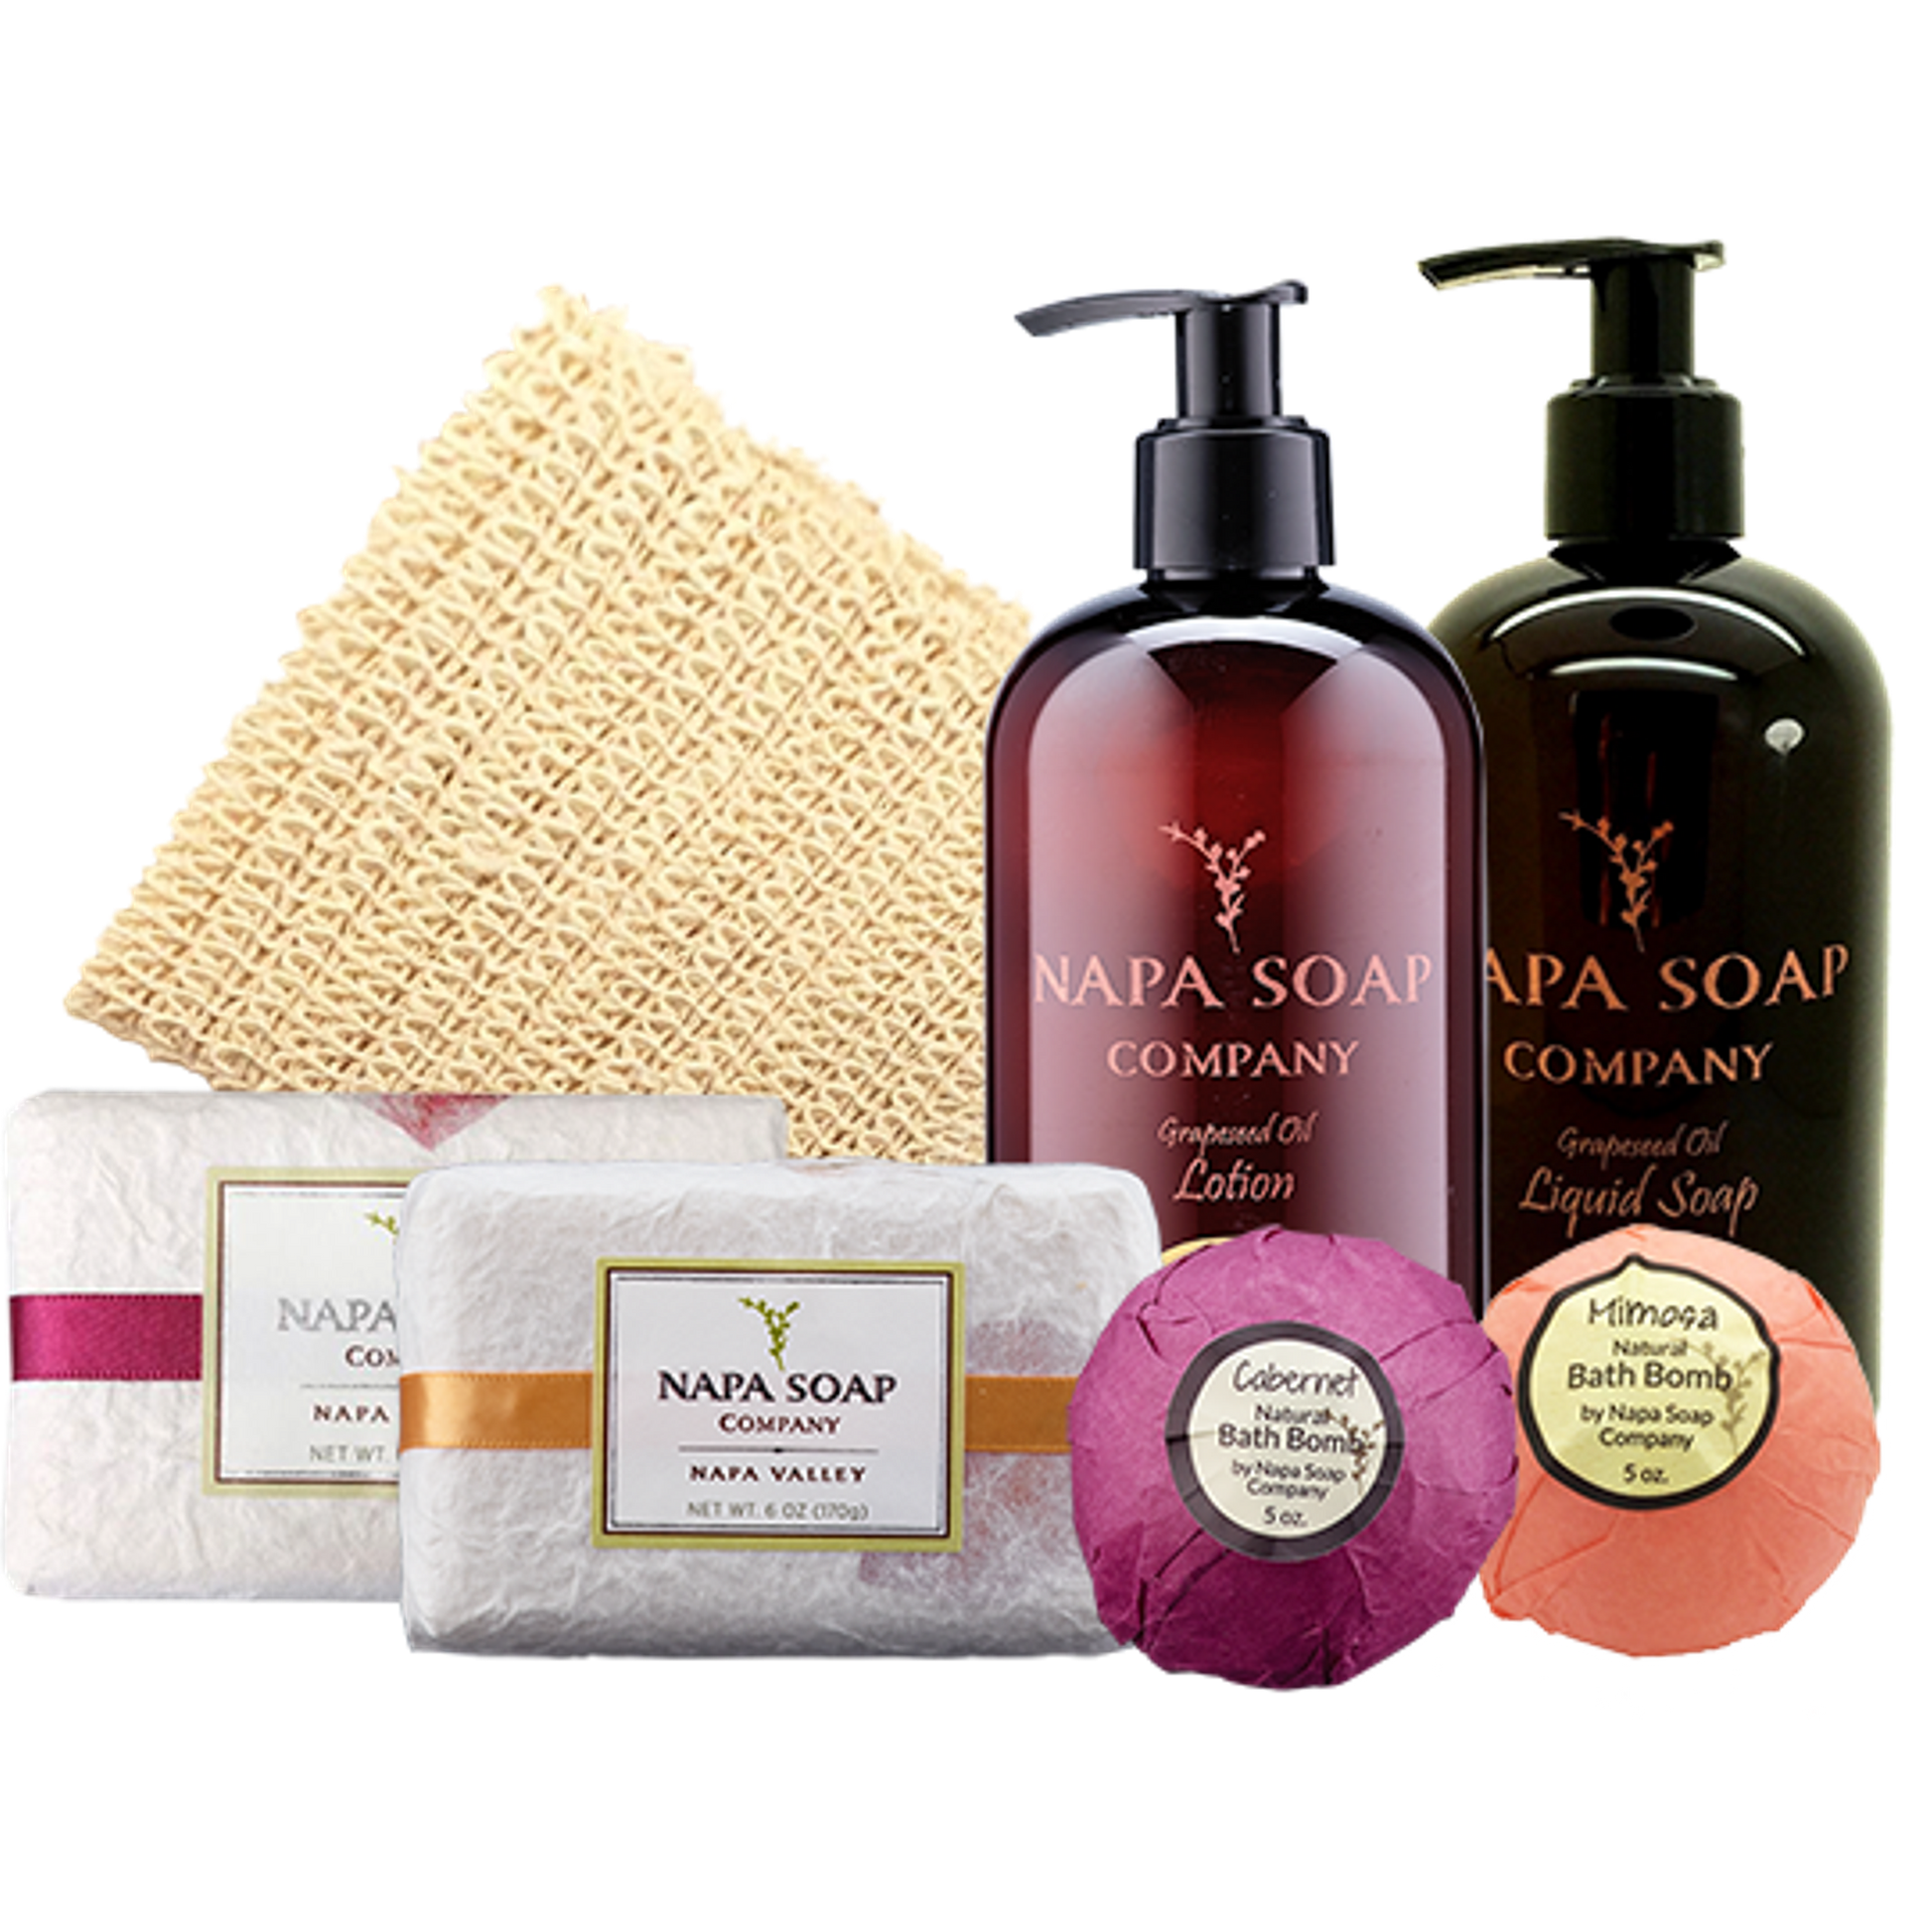  Nag Champa Lovers Spa Gift Set - Lotion, Soap, Solid Perfume,  Candle & Aroma Oil. : Health & Household